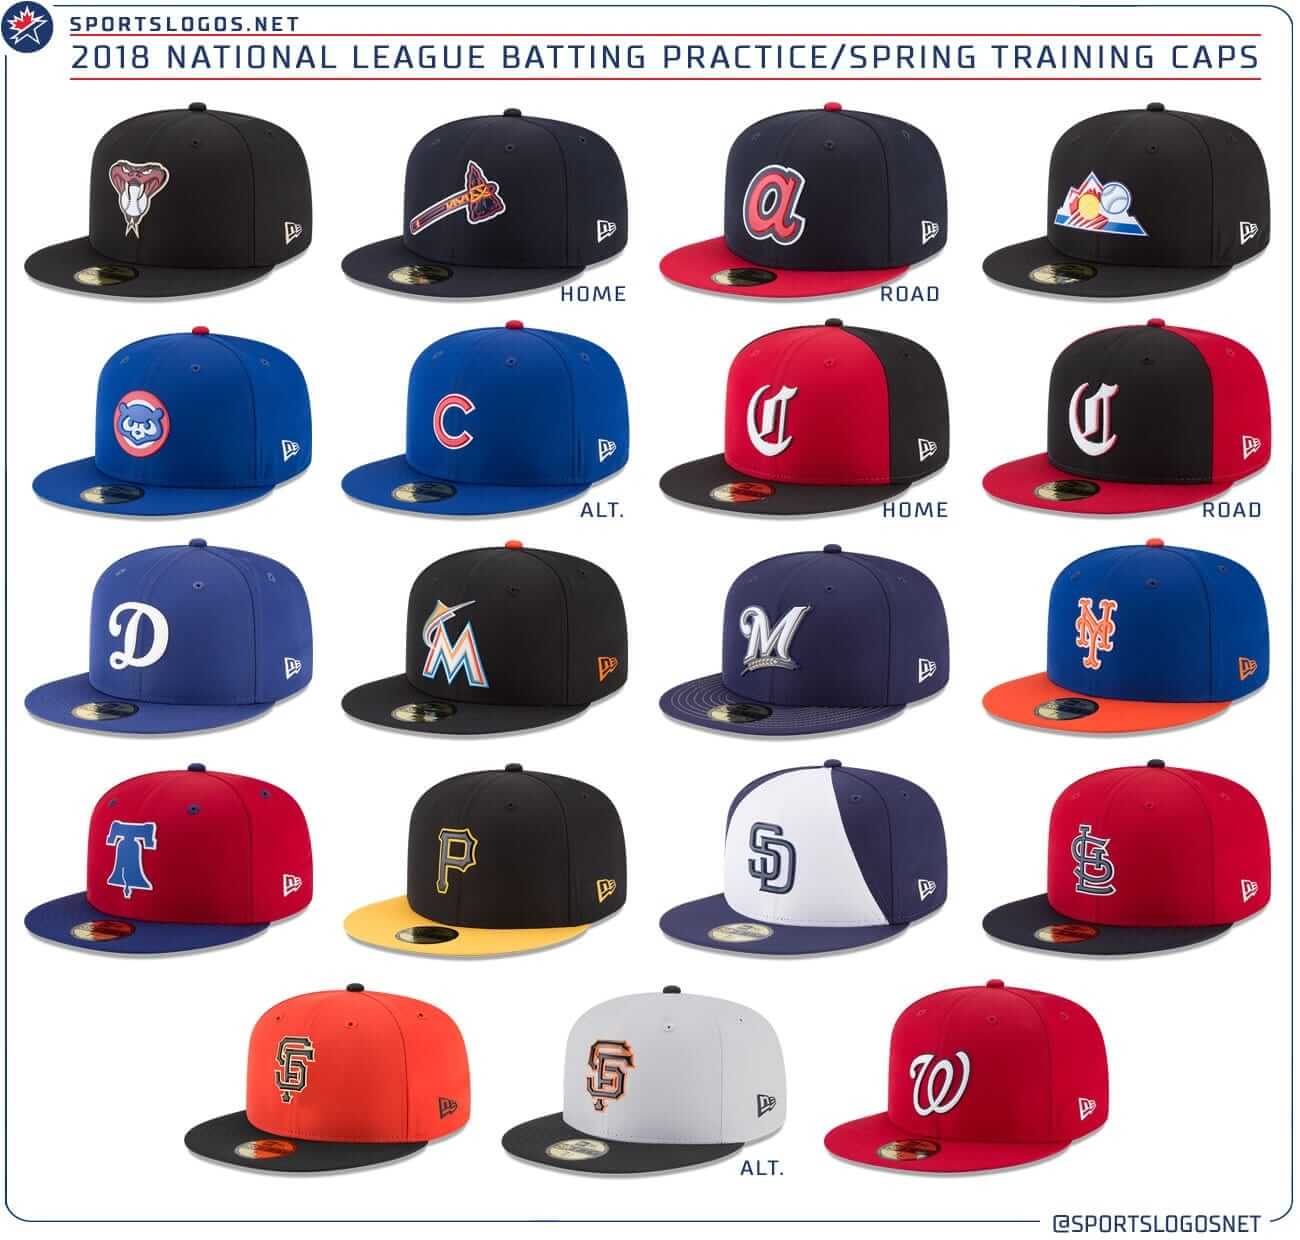 Uni Watch's exclusive look at the new MLB batting practice caps